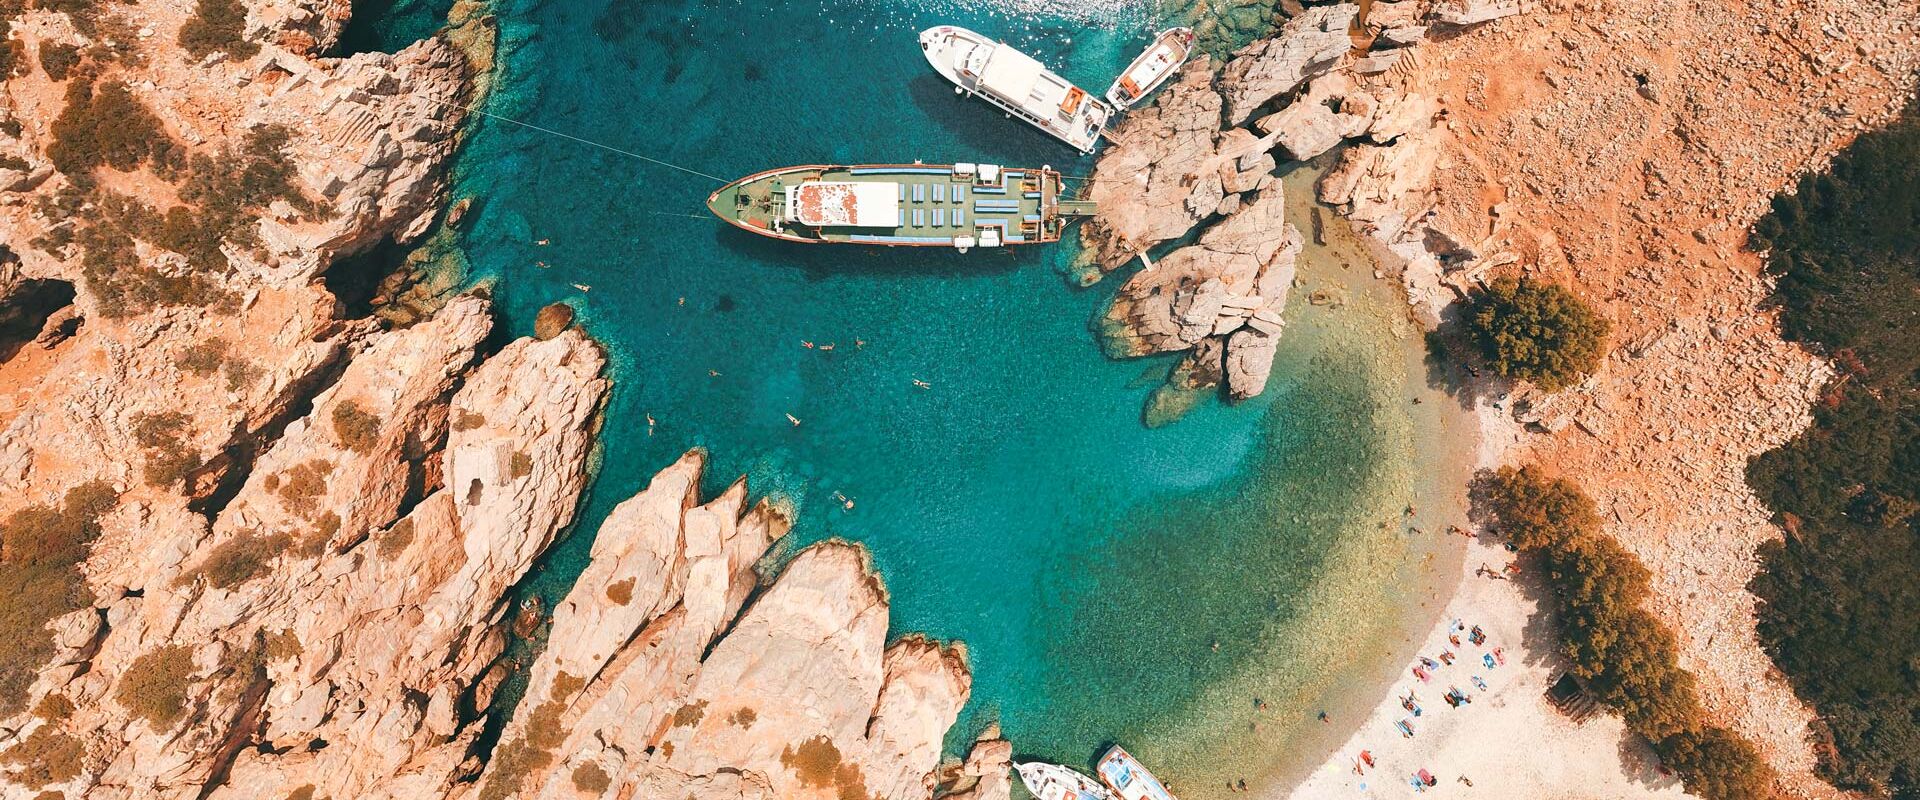 Depending on which boat excursion you take from Karpathos, your day trip to Saria will involve soaking up the feeling of freedom on the beach and swimming in wonderfully clear water